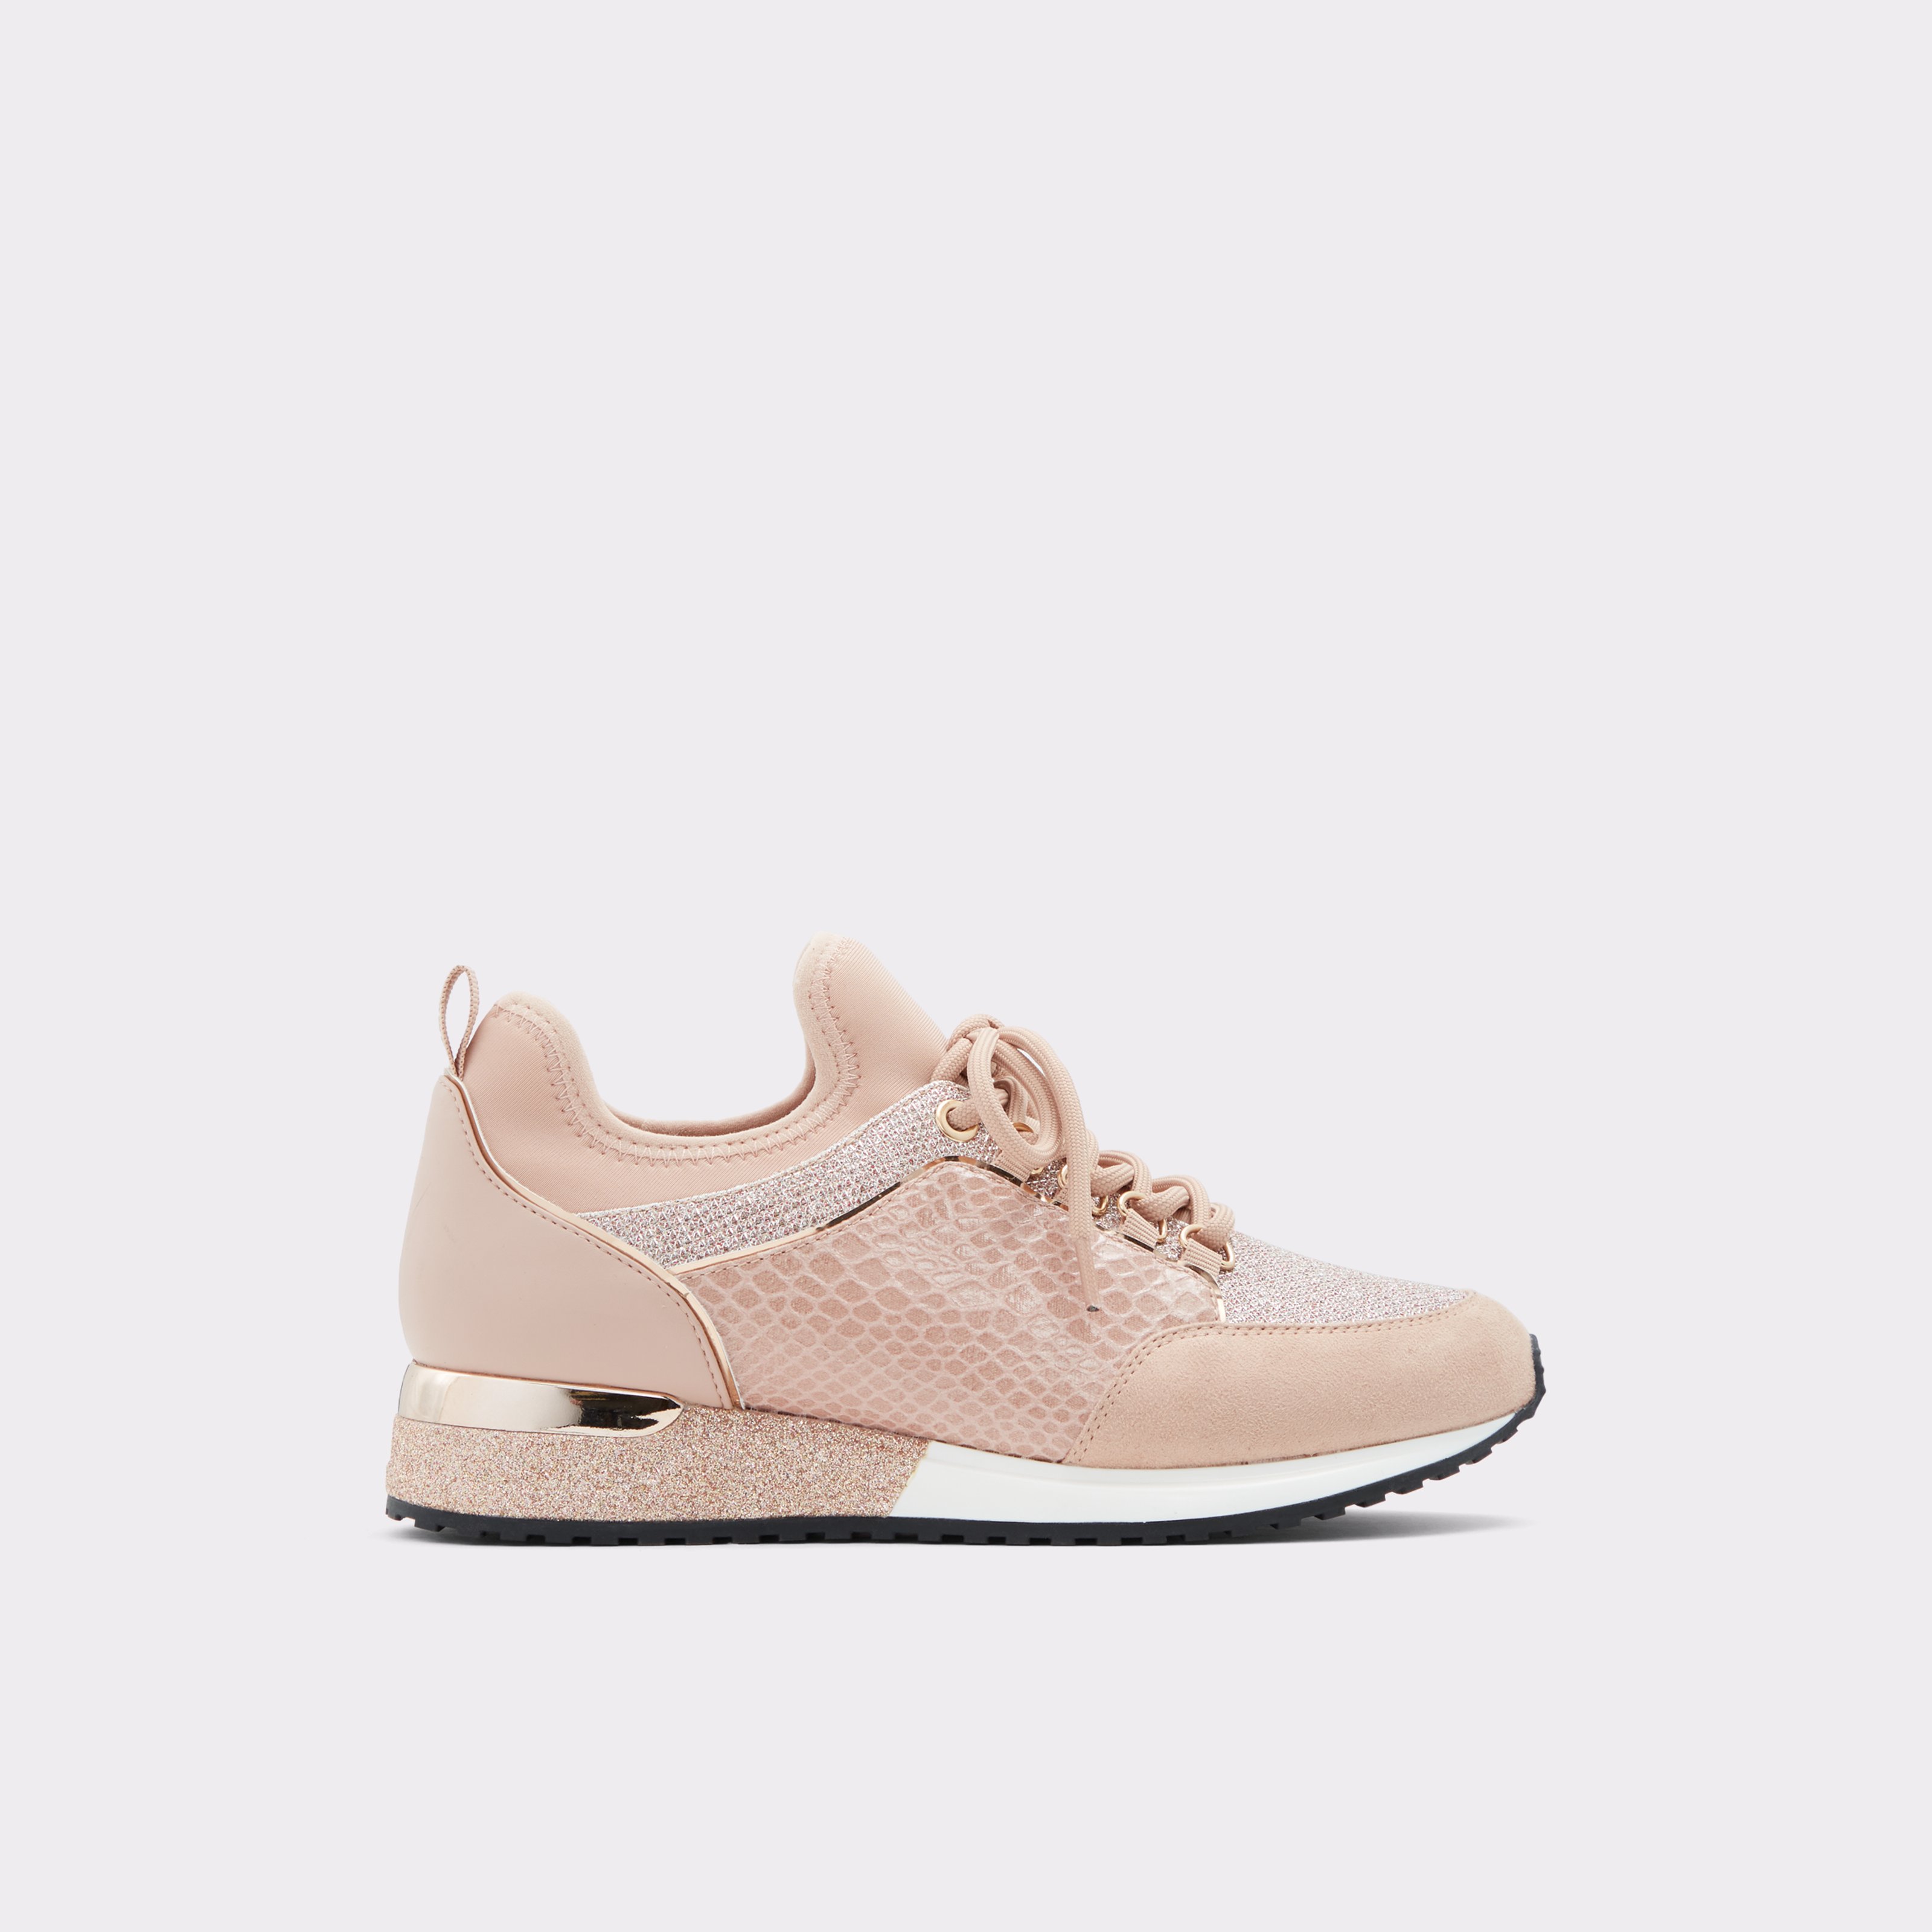 Courtwood Rose Gold Women's Low top sneakers | ALDO US